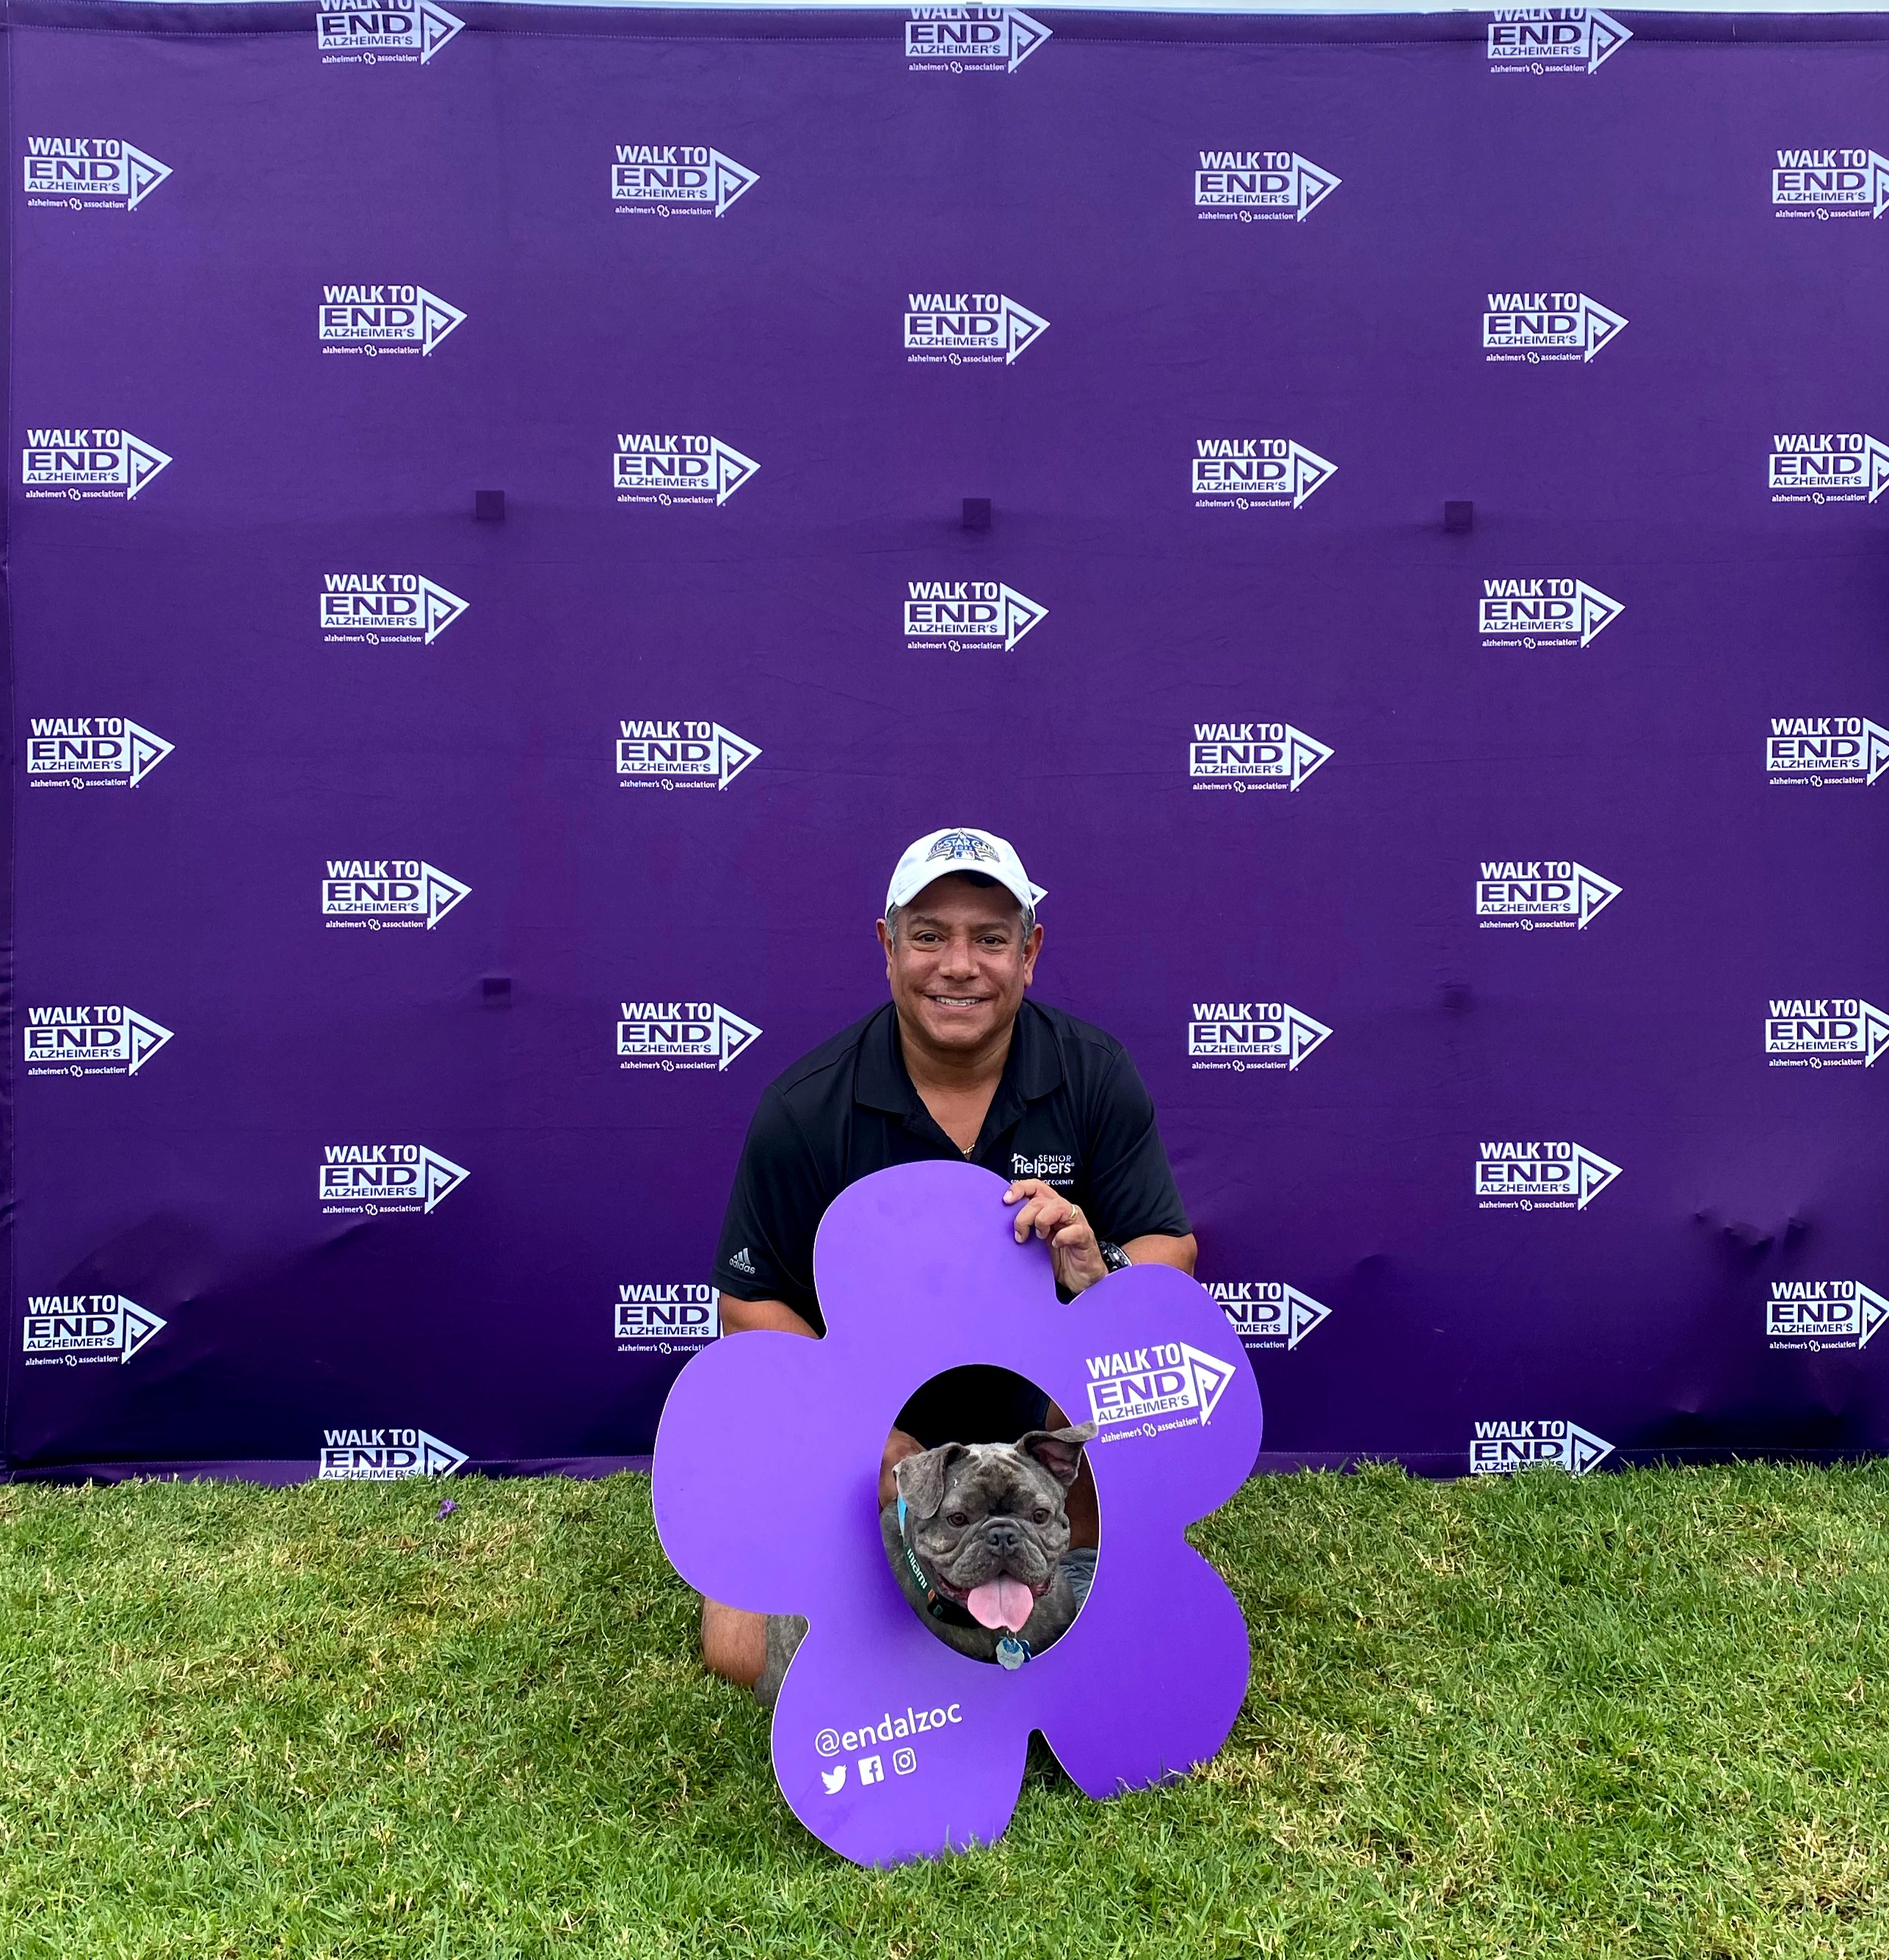 Together we will find a cure. Great time today at the Walk to End Alzheimer’s event in Irvine, CA.